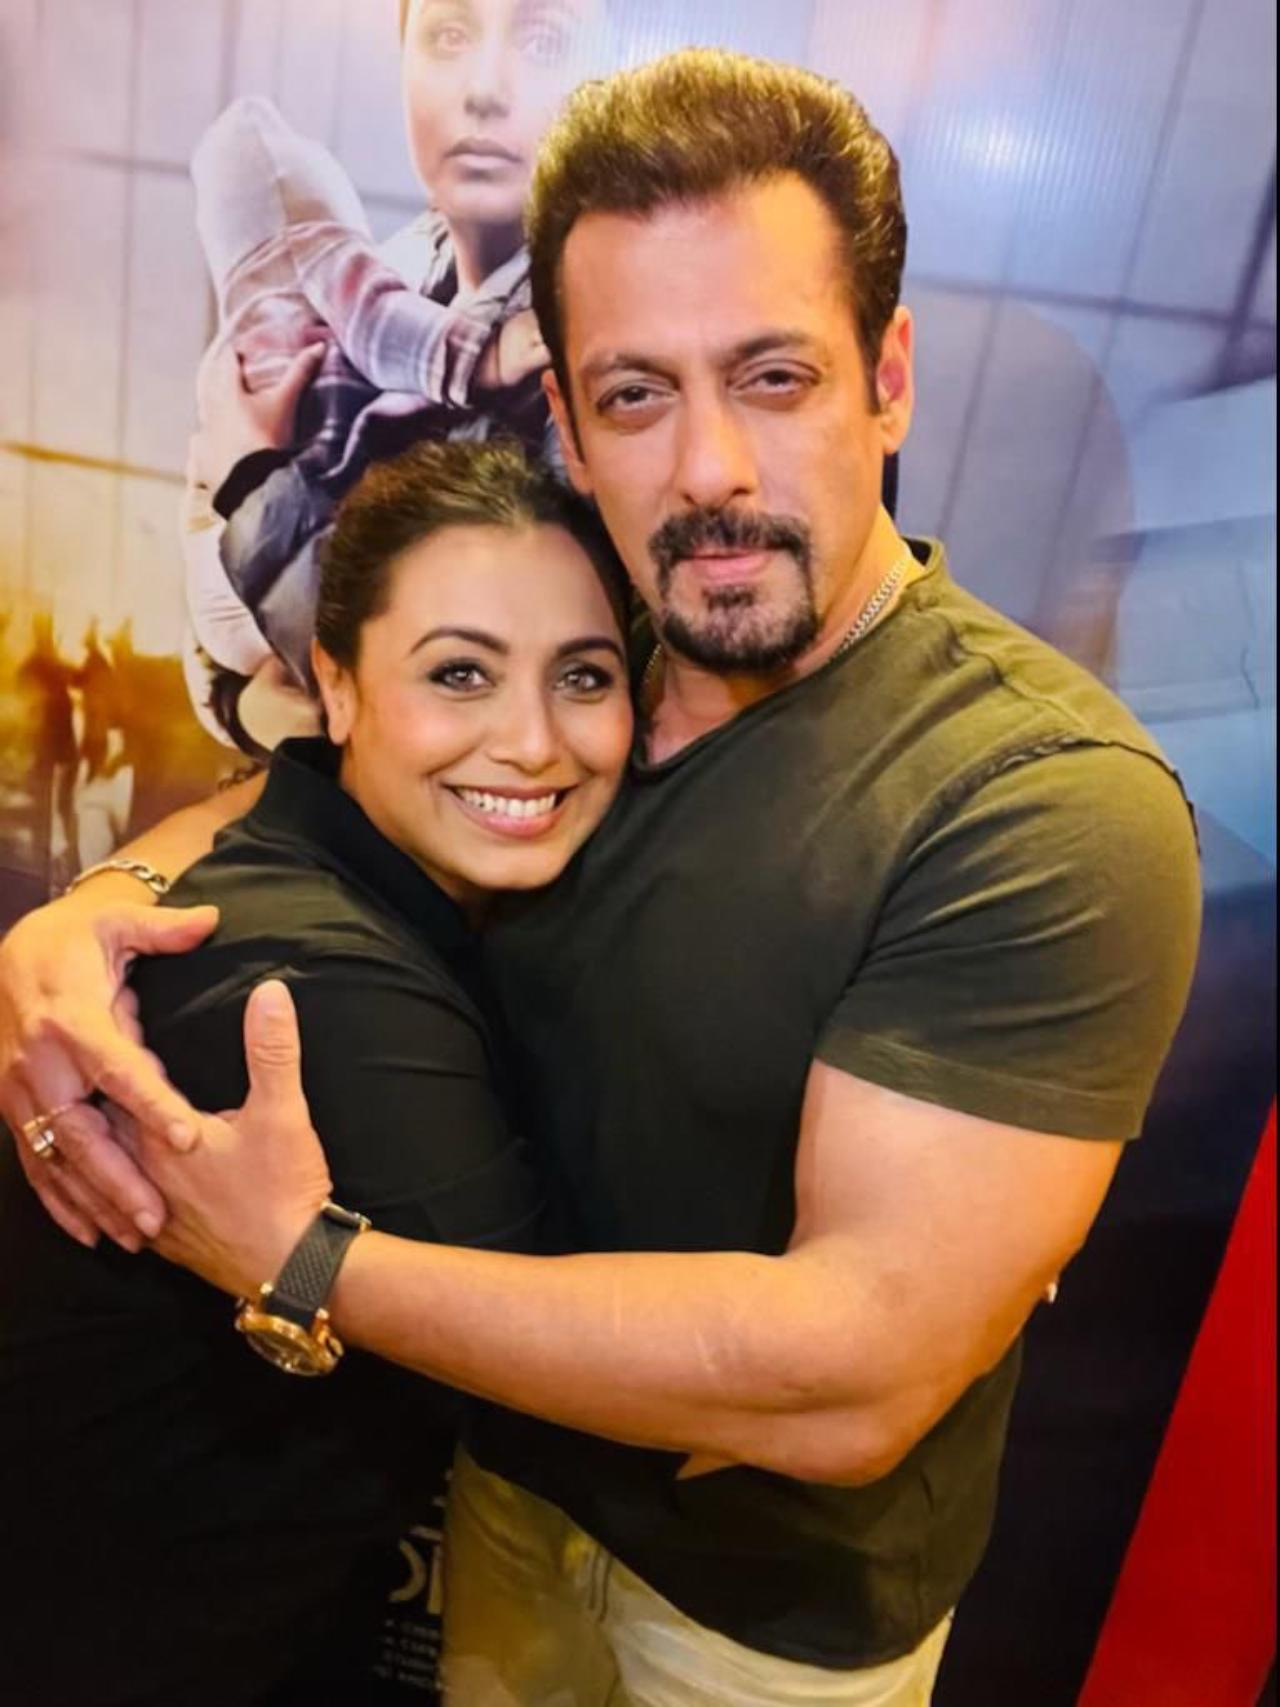 Salman Khan and Rani Mukerji hugged and posed after the screening of Mrs Chattejee vs Norway. Reportedly, Khan was very impressed with his Har Dil Jo Pyaar Karega co-star